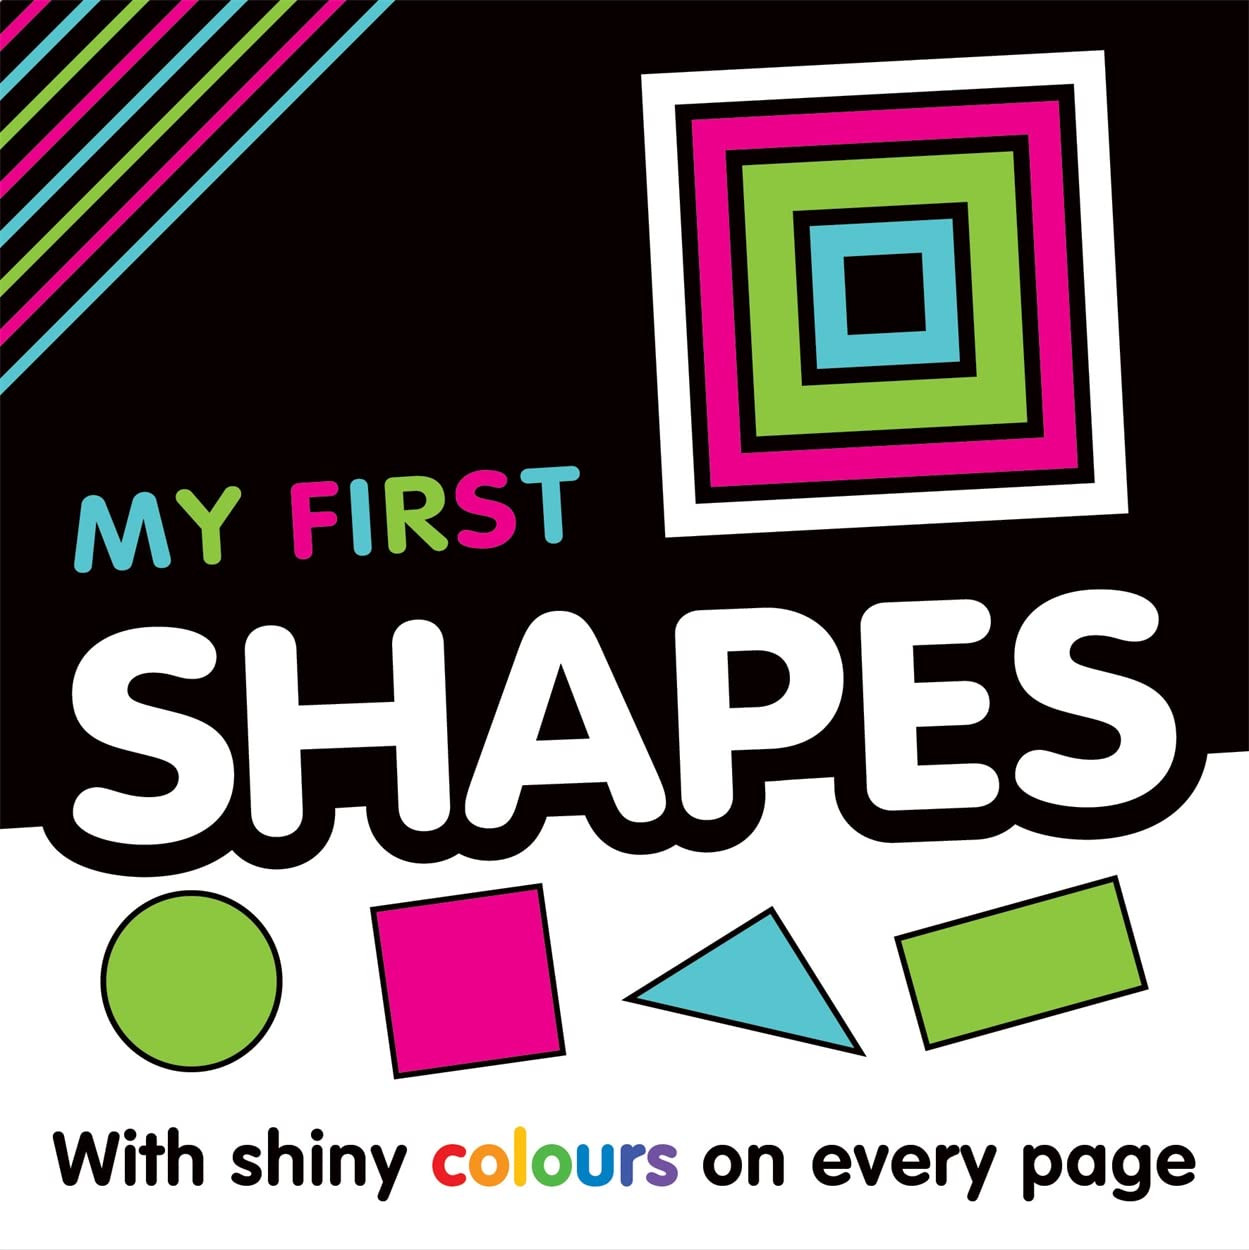 My first shapes